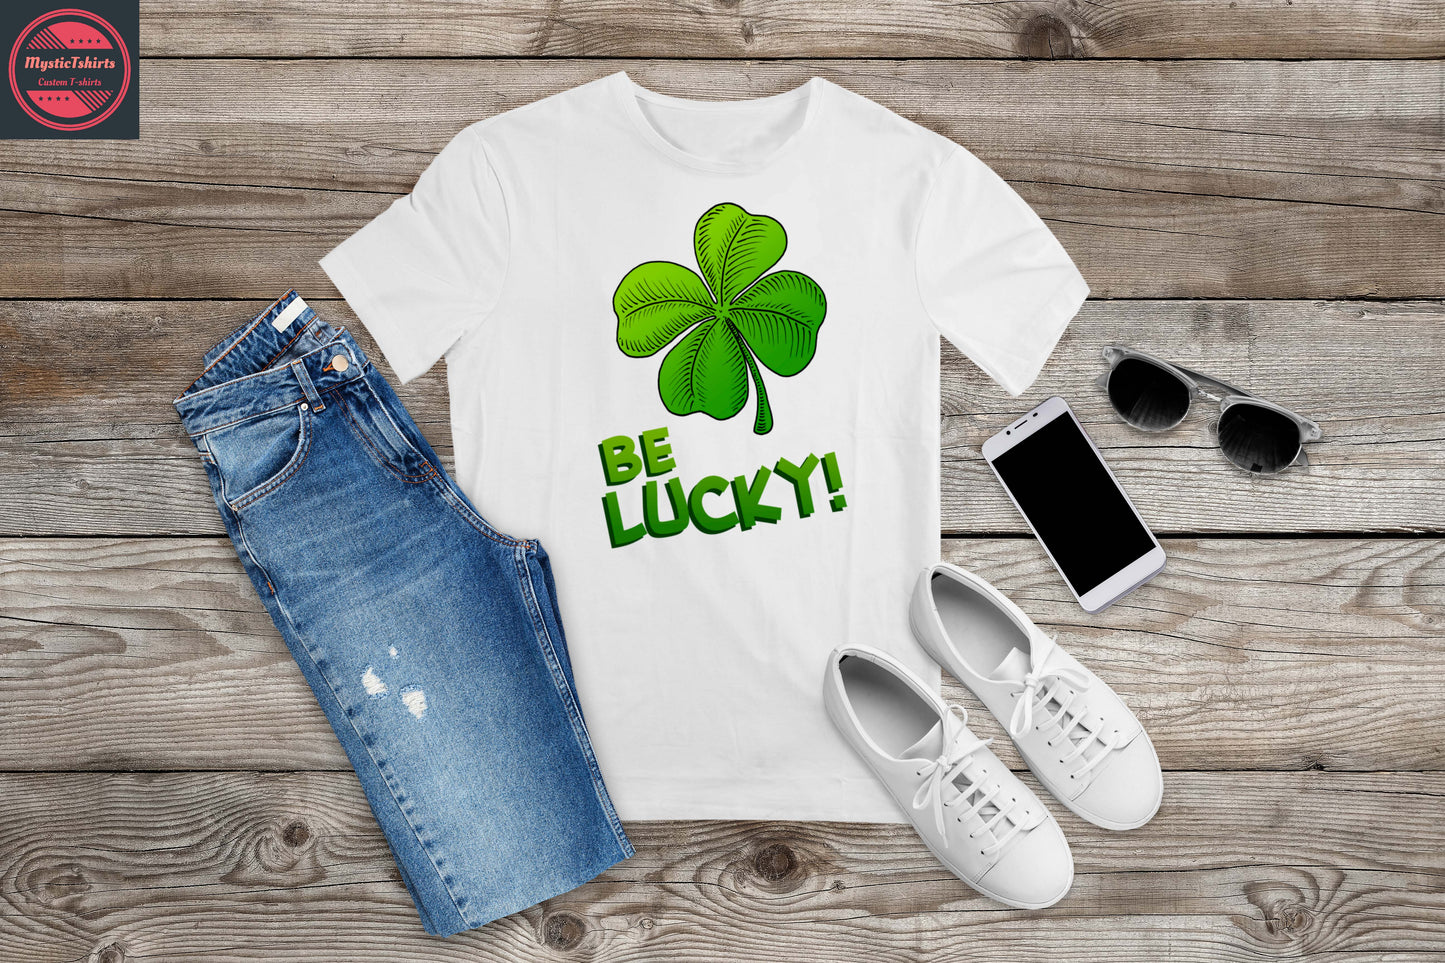 024. BE LUCKY, Custom Made Shirt, Personalized T-Shirt, Custom Text, Make Your Own Shirt, Custom Tee